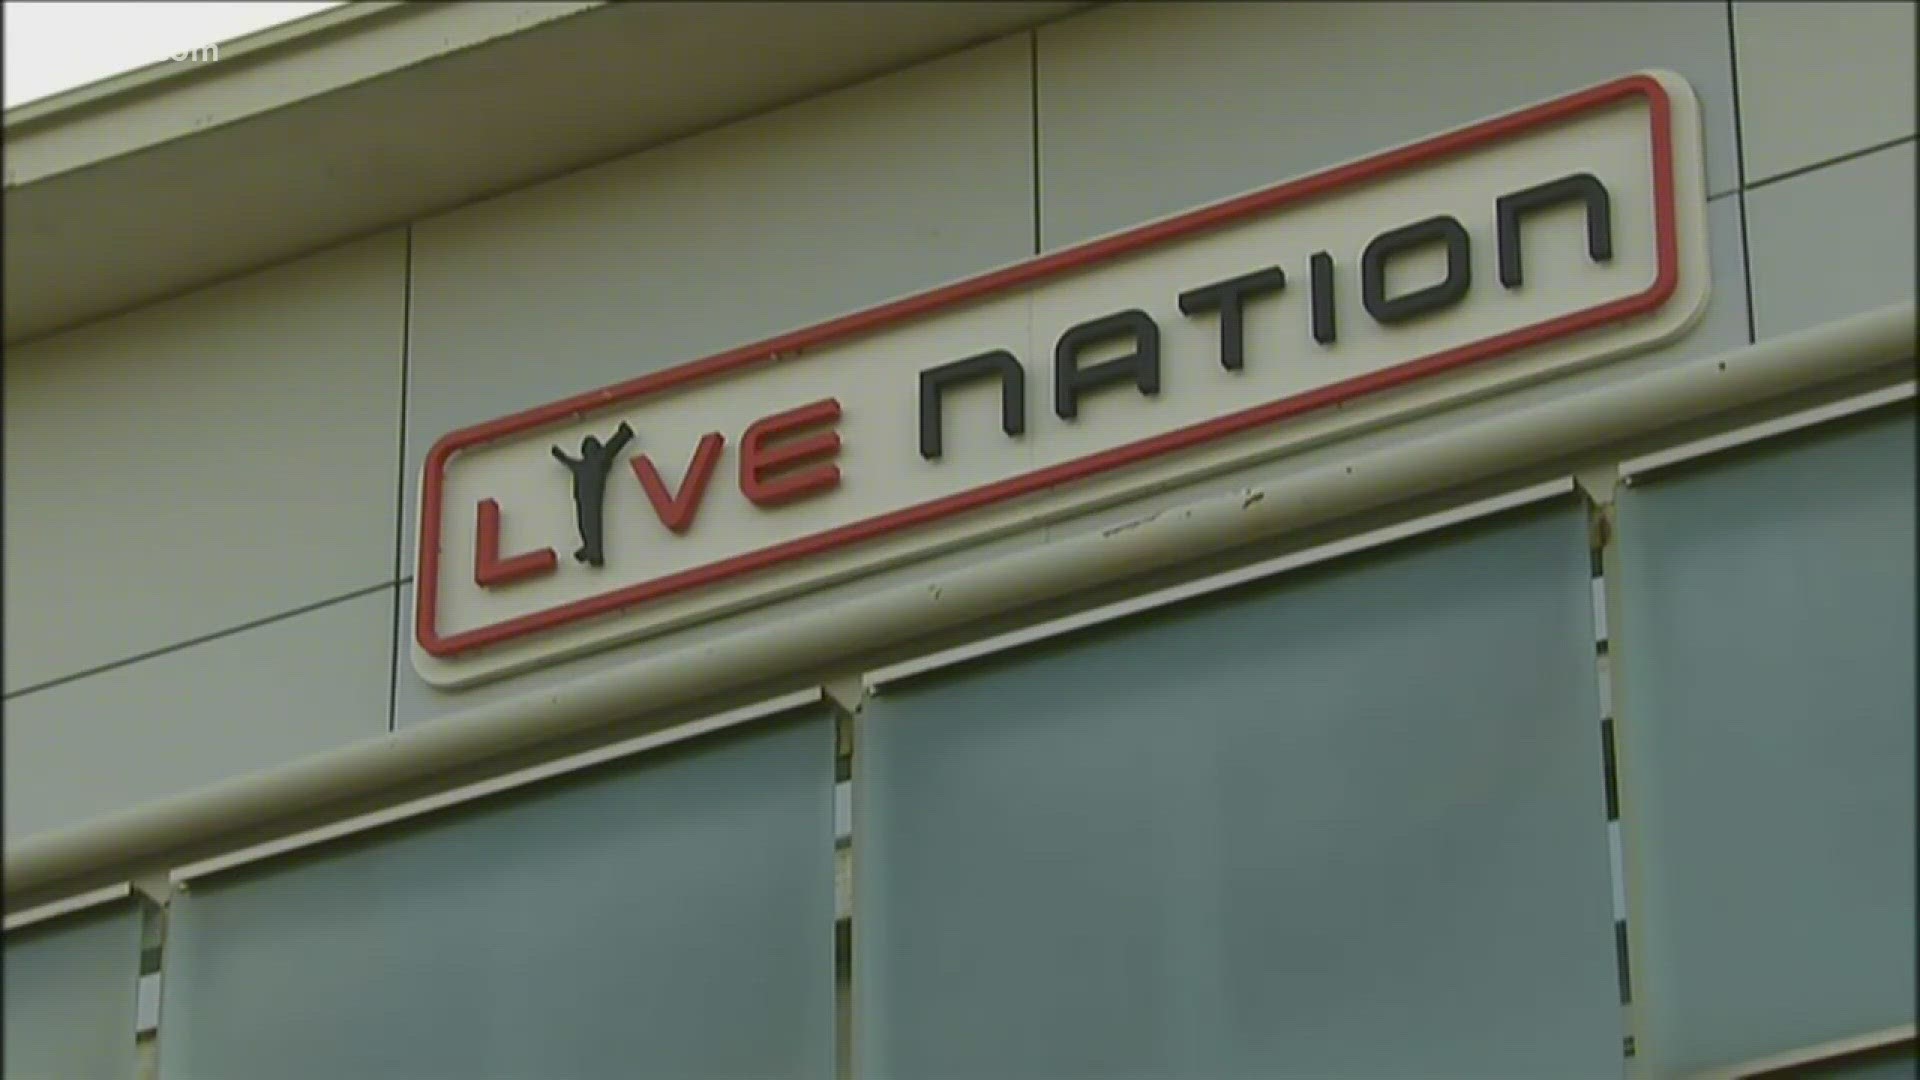 Sen. Richard Blumenthal says that Live Nation's strategy consists of "predatory practices" on the customers.